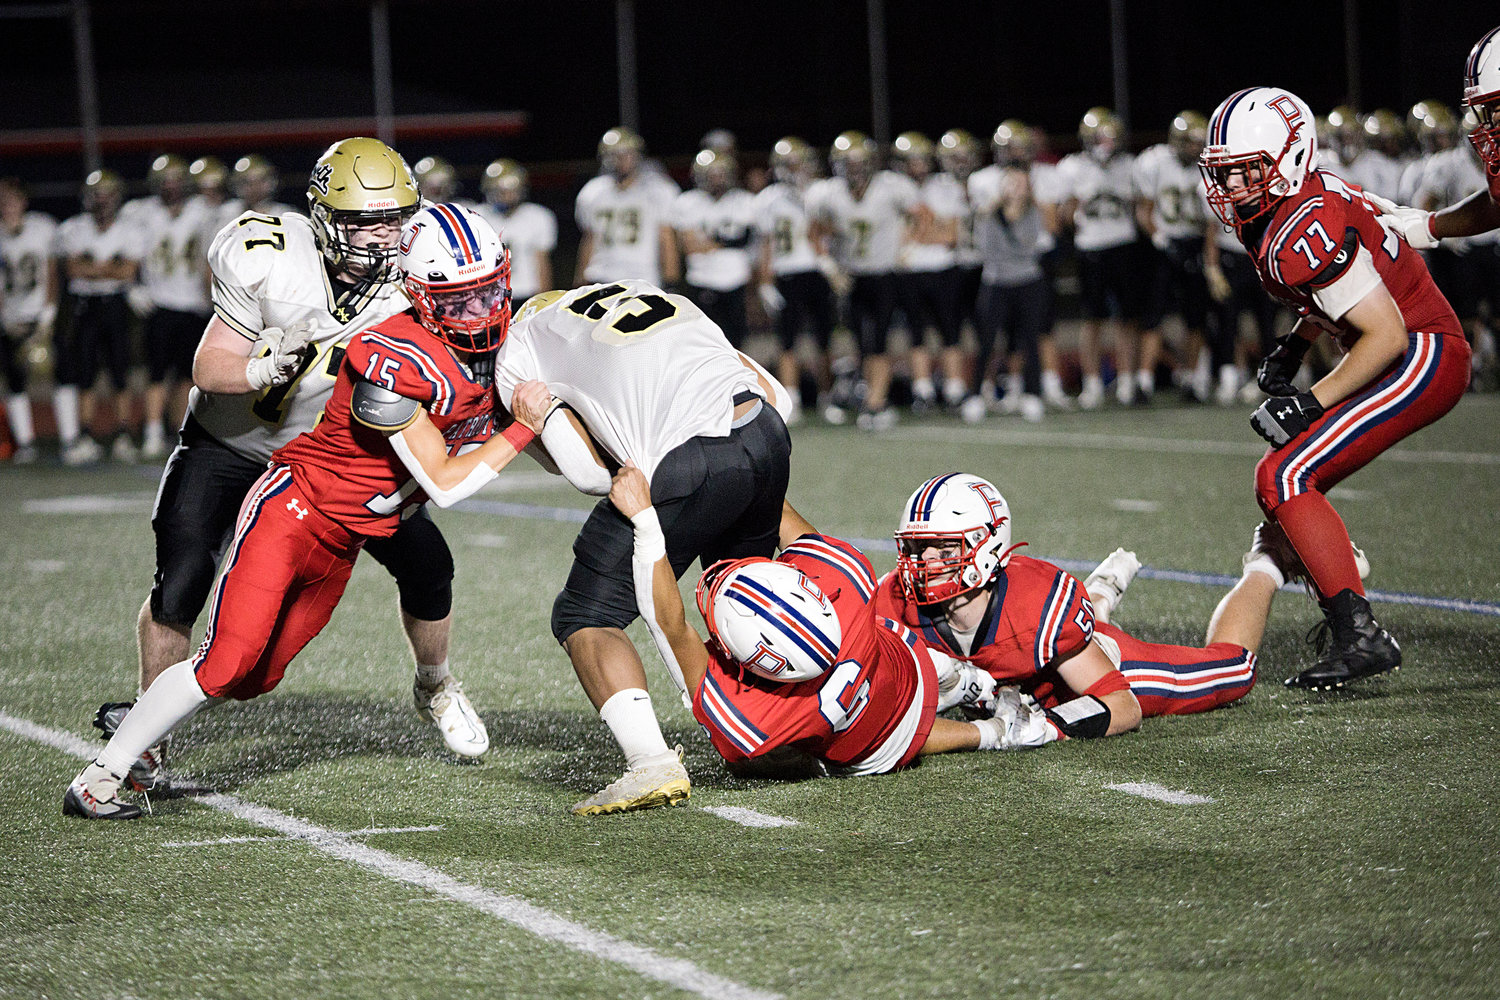 Christopher Wilkie, Michael Archer, and Tristan Conheeny (from left) work to take down a North Kingstown ball-carrier. Benjamin Blythe is at right.